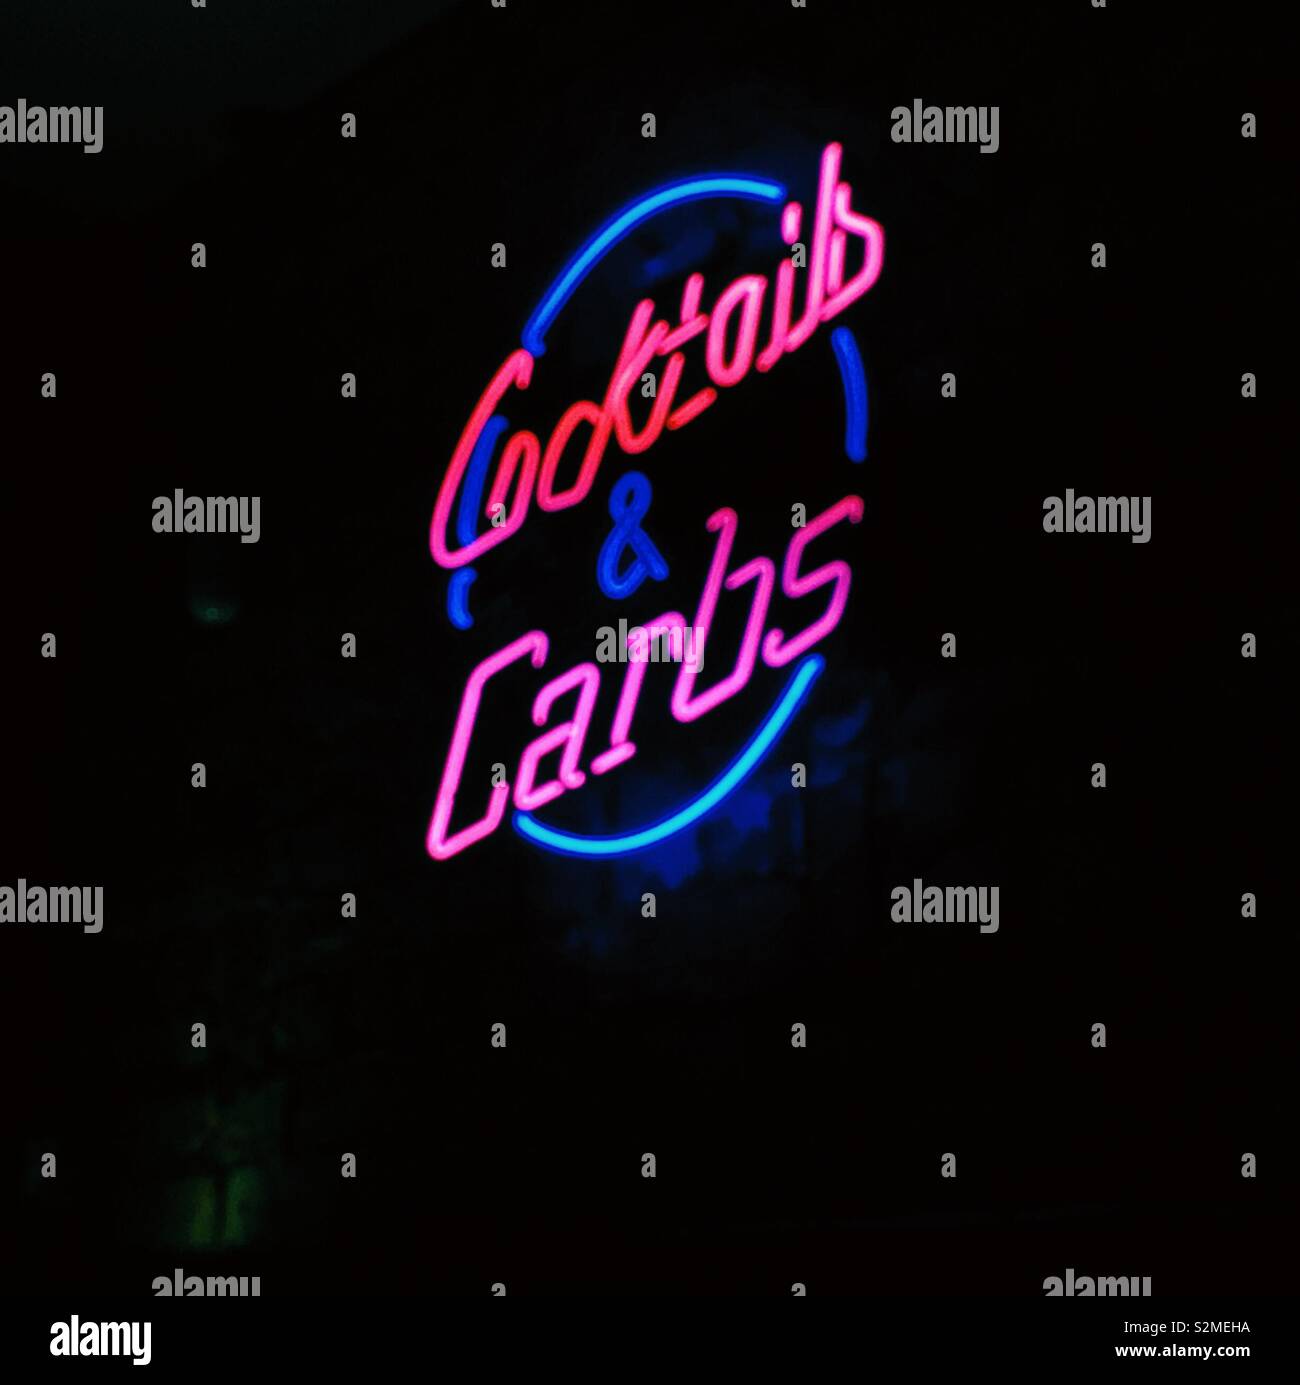 Cocktails and carbs neon sign Stock Photo